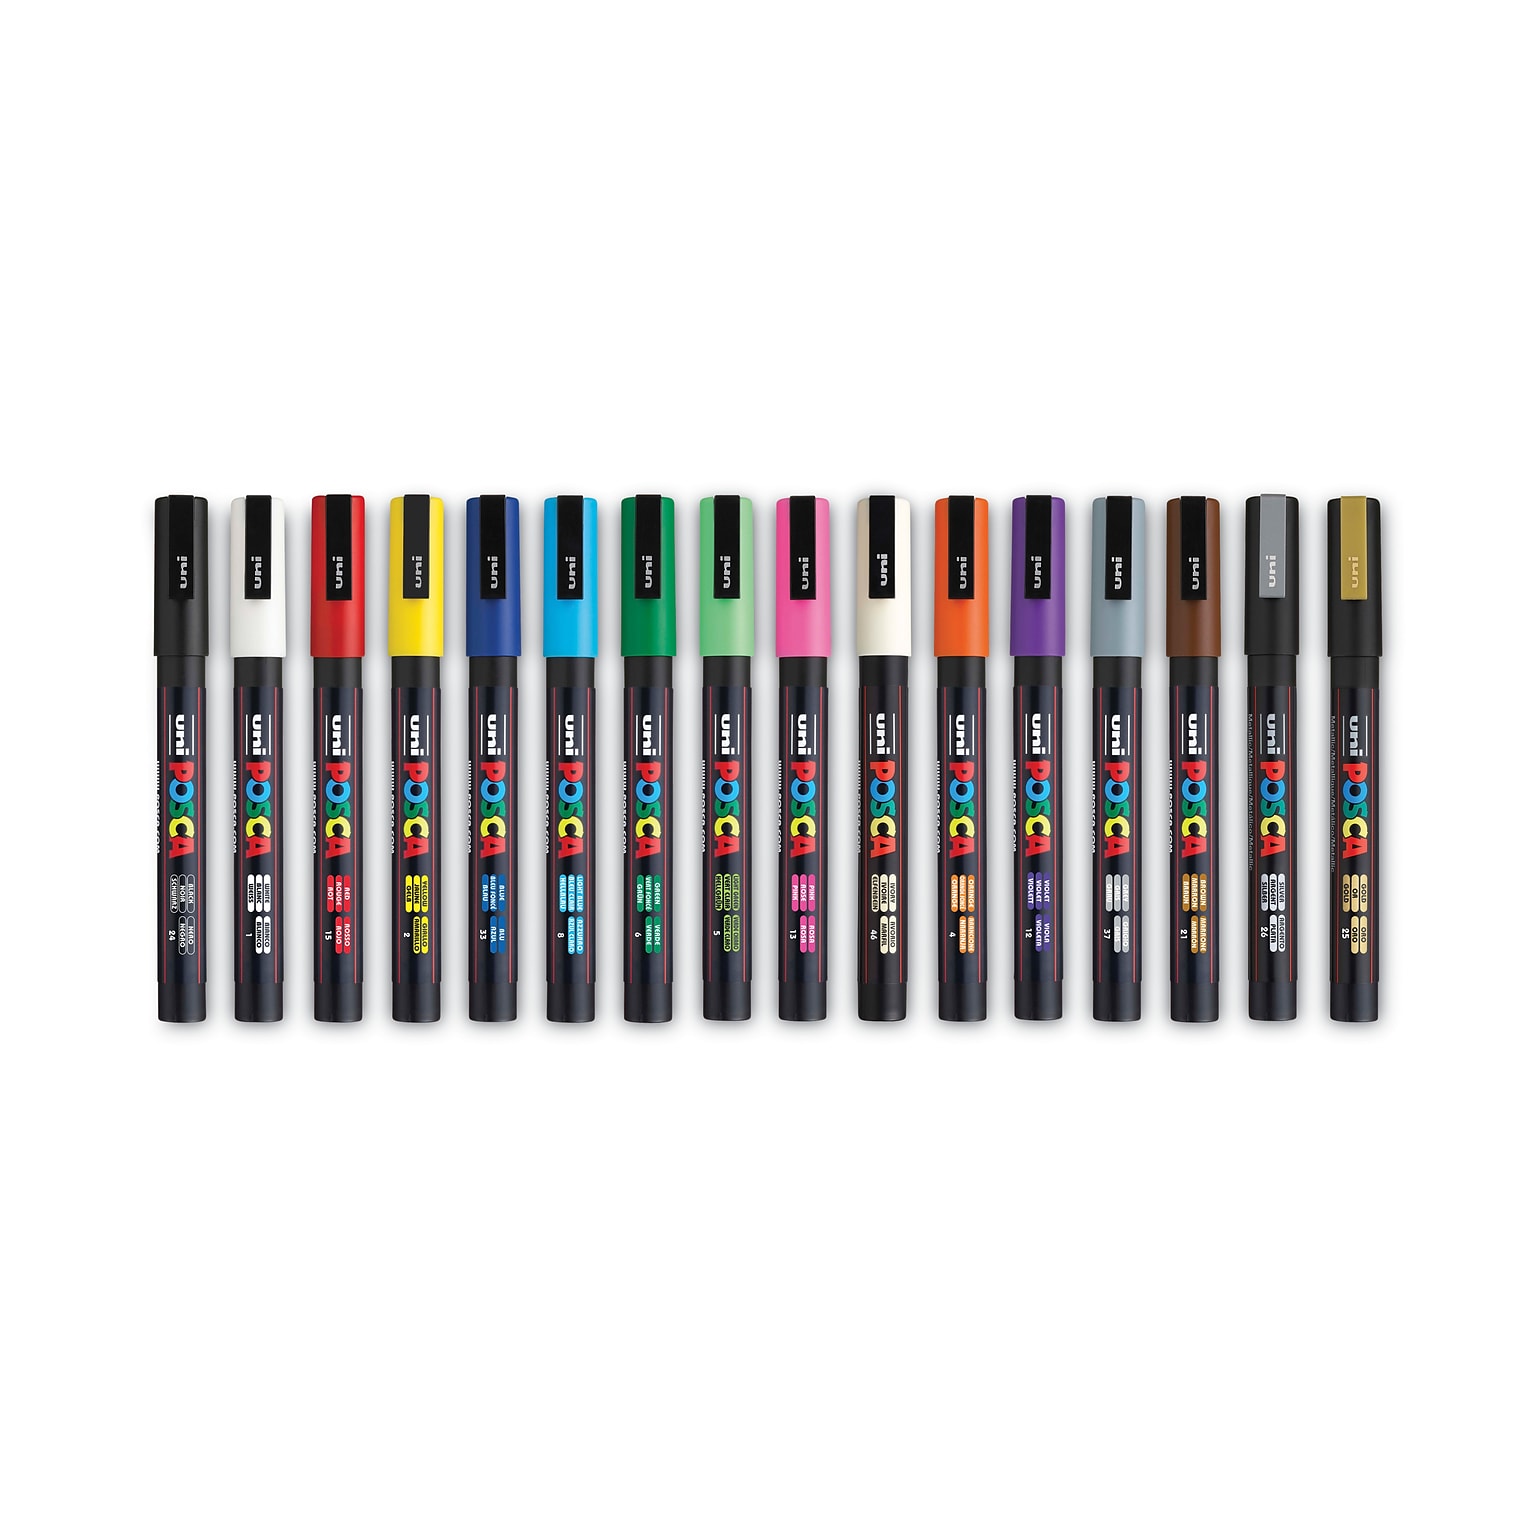 Uni POSCA Permanent Specialty Marker, Fine Bullet Tip, Assorted Colors, 16/Pack (PC3M16C)